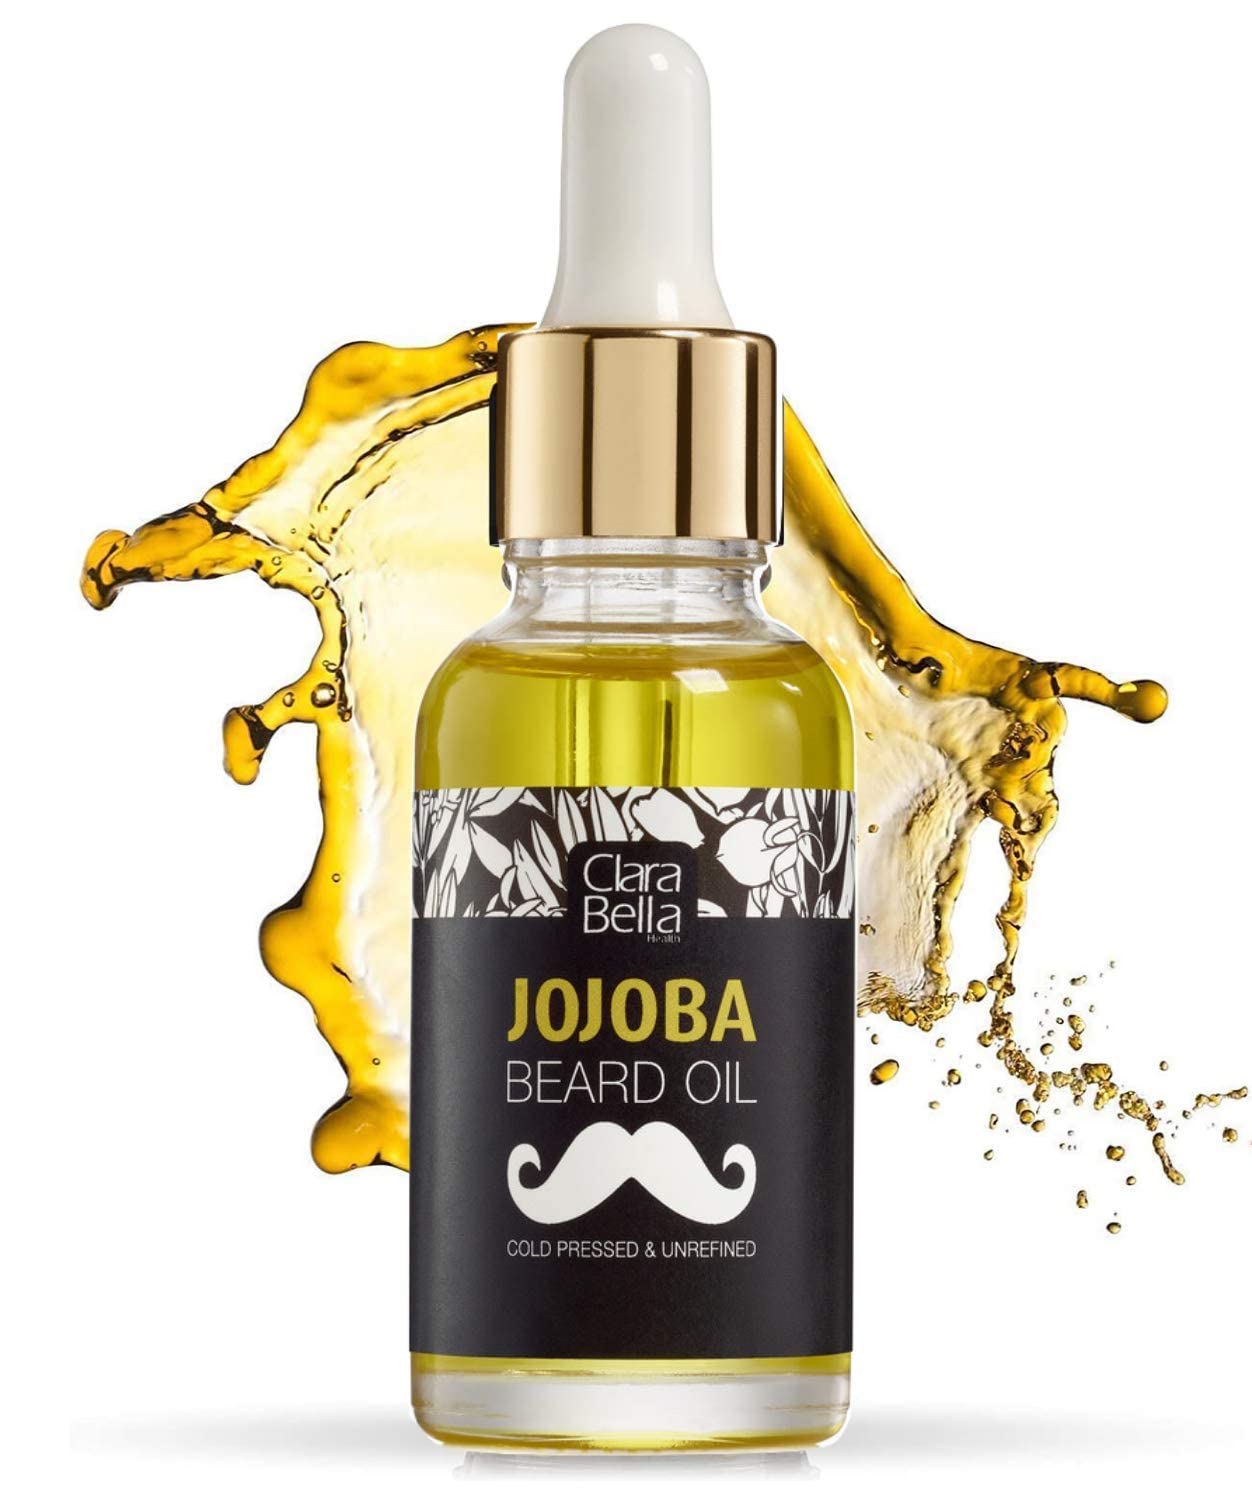 Can organic beard oils help with itchiness? 2